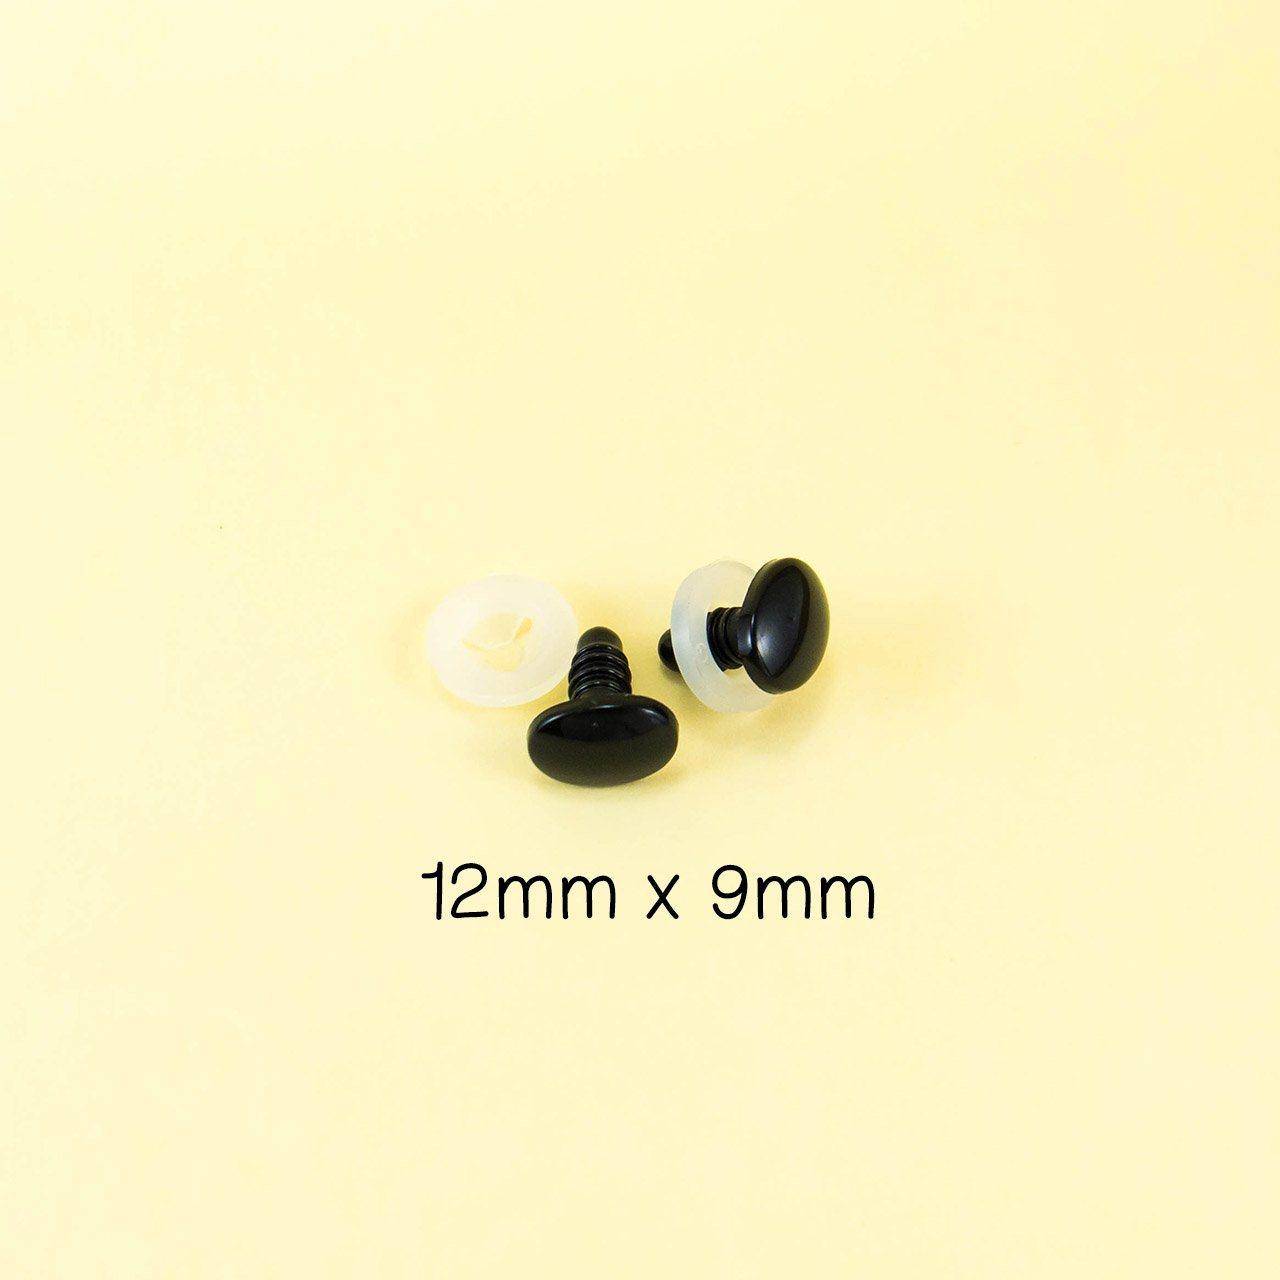 12mm x 9mm oval safety eyes / noses for amigurumi and handmade toys